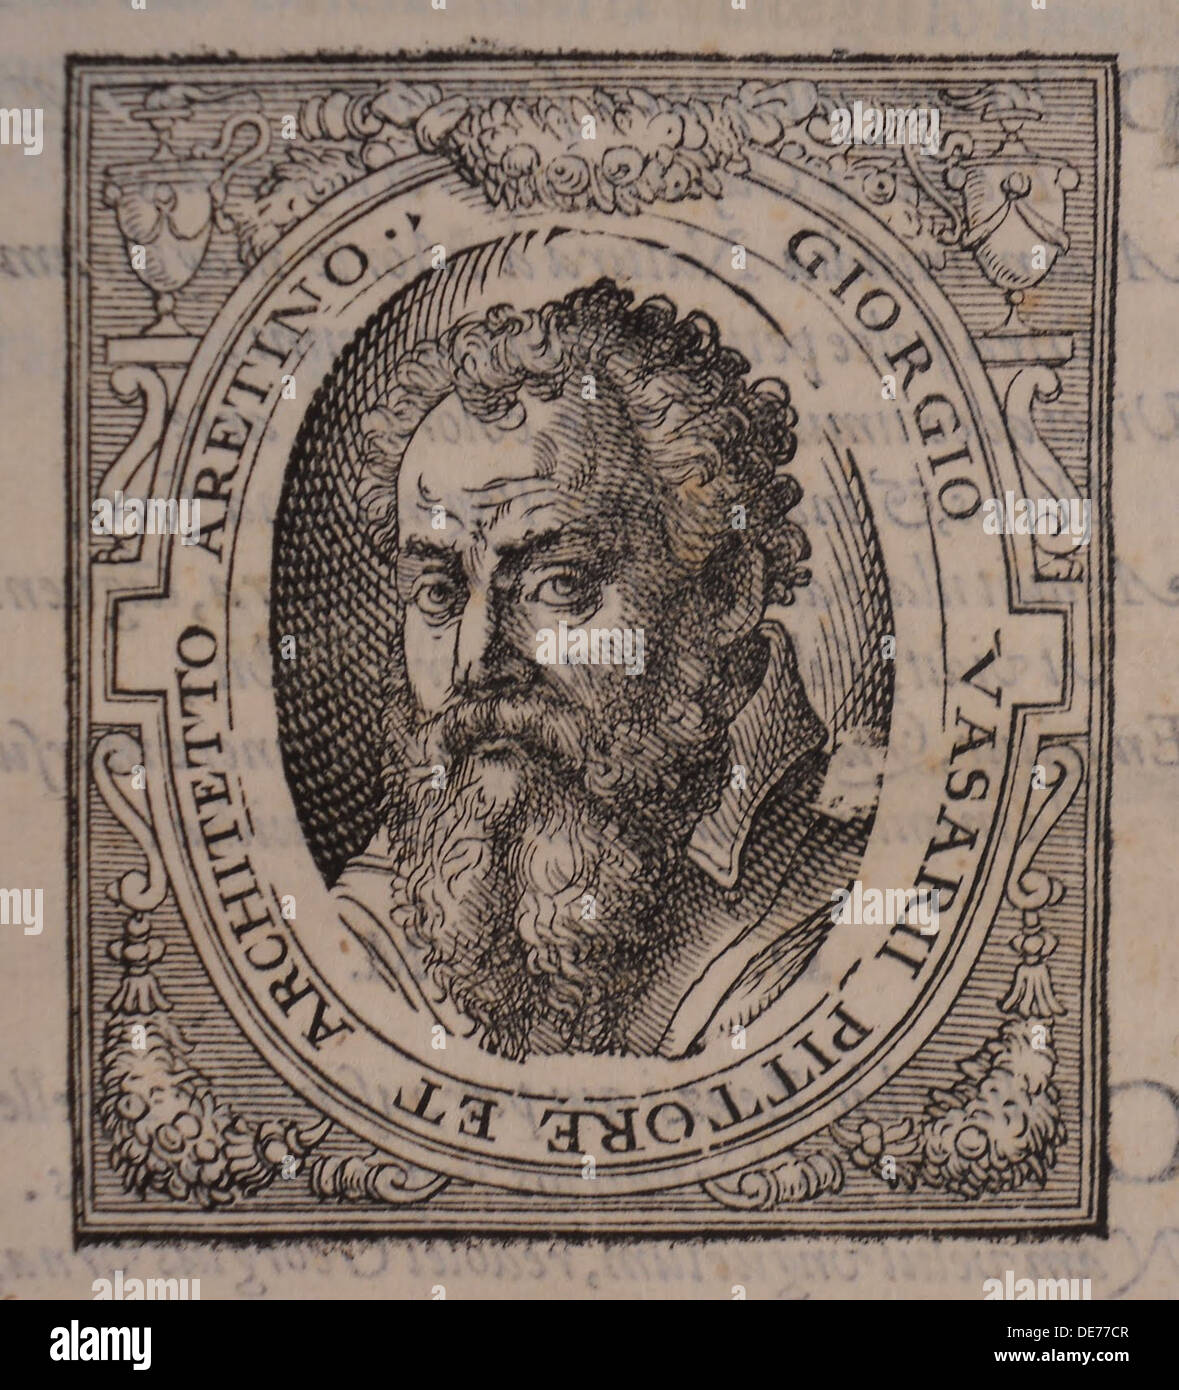 Giorgio Vasari. From: Giorgio Vasari, The Lives of the Most Excellent Italian Painters, Sculptors, and Architects, 1568. Artist: Anonymous Stock Photo